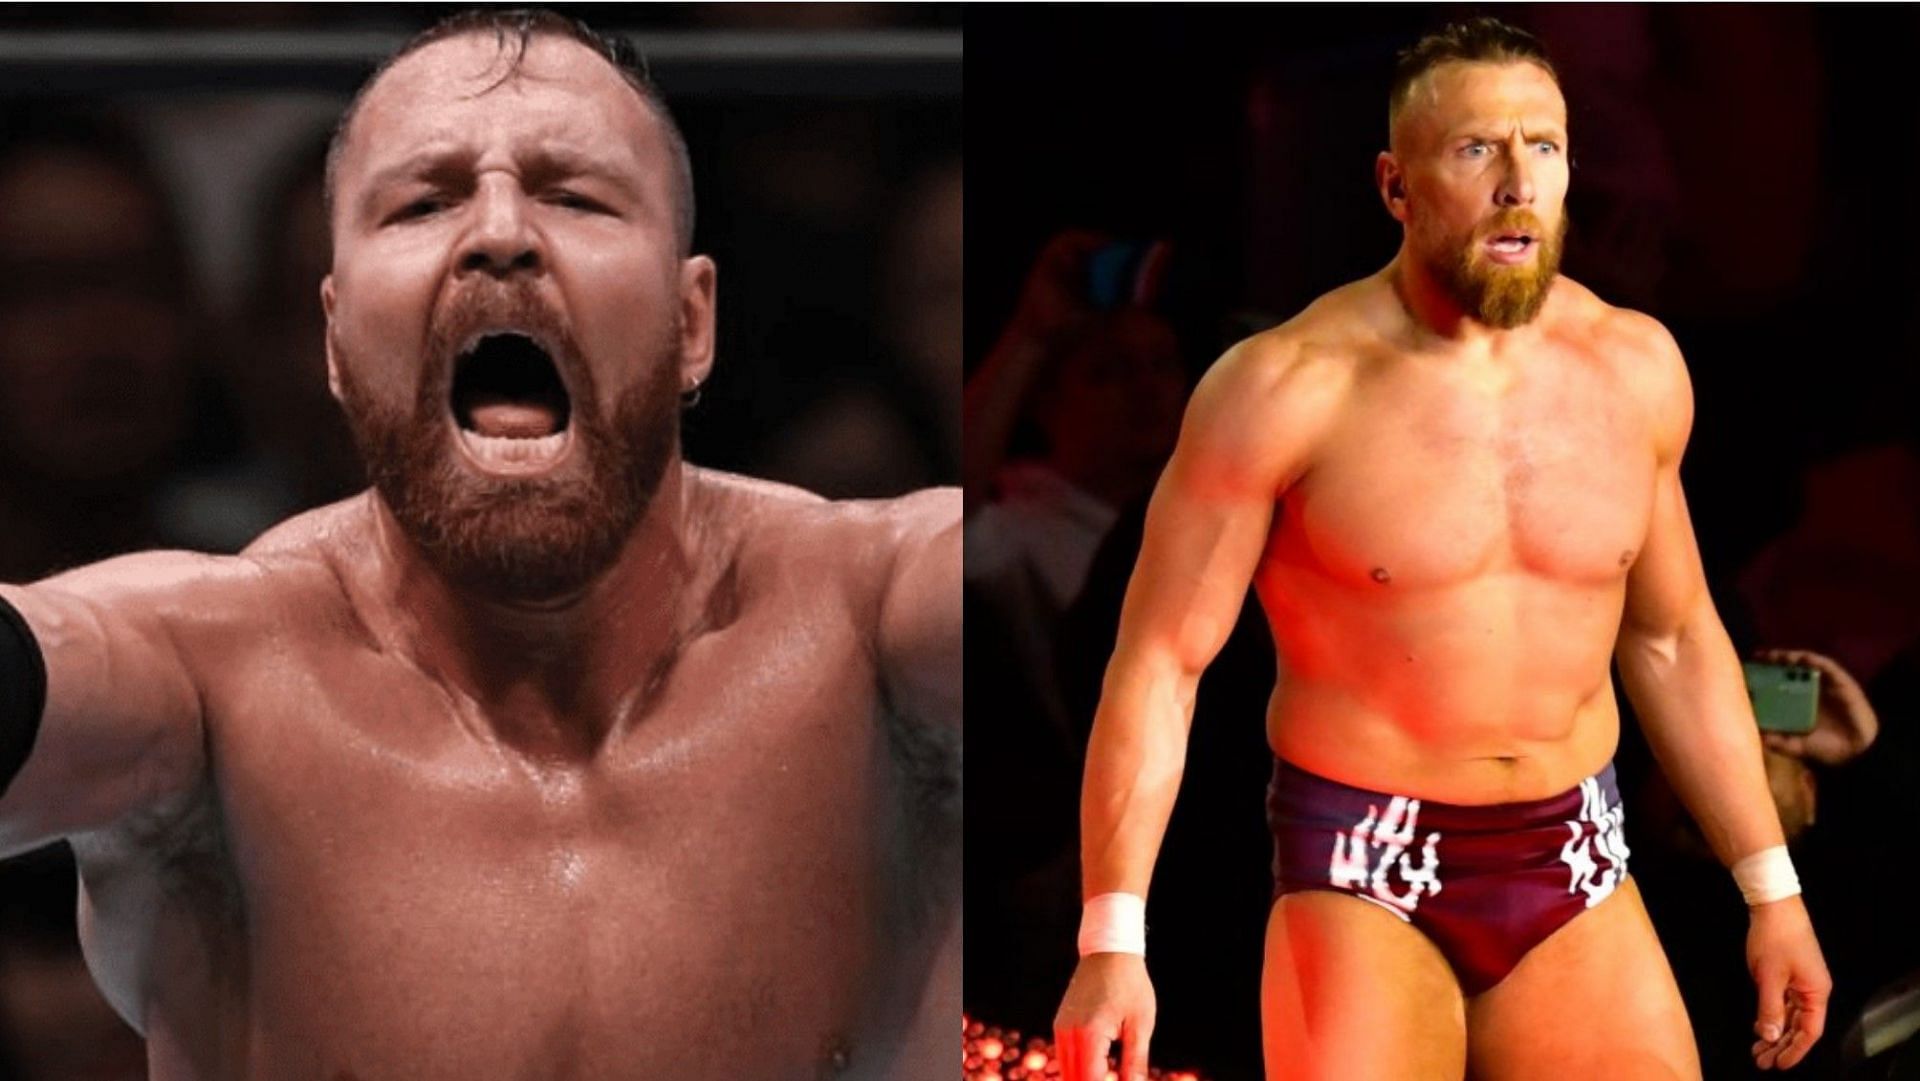 Jon Moxley (left) and Bryan Danielson (right)